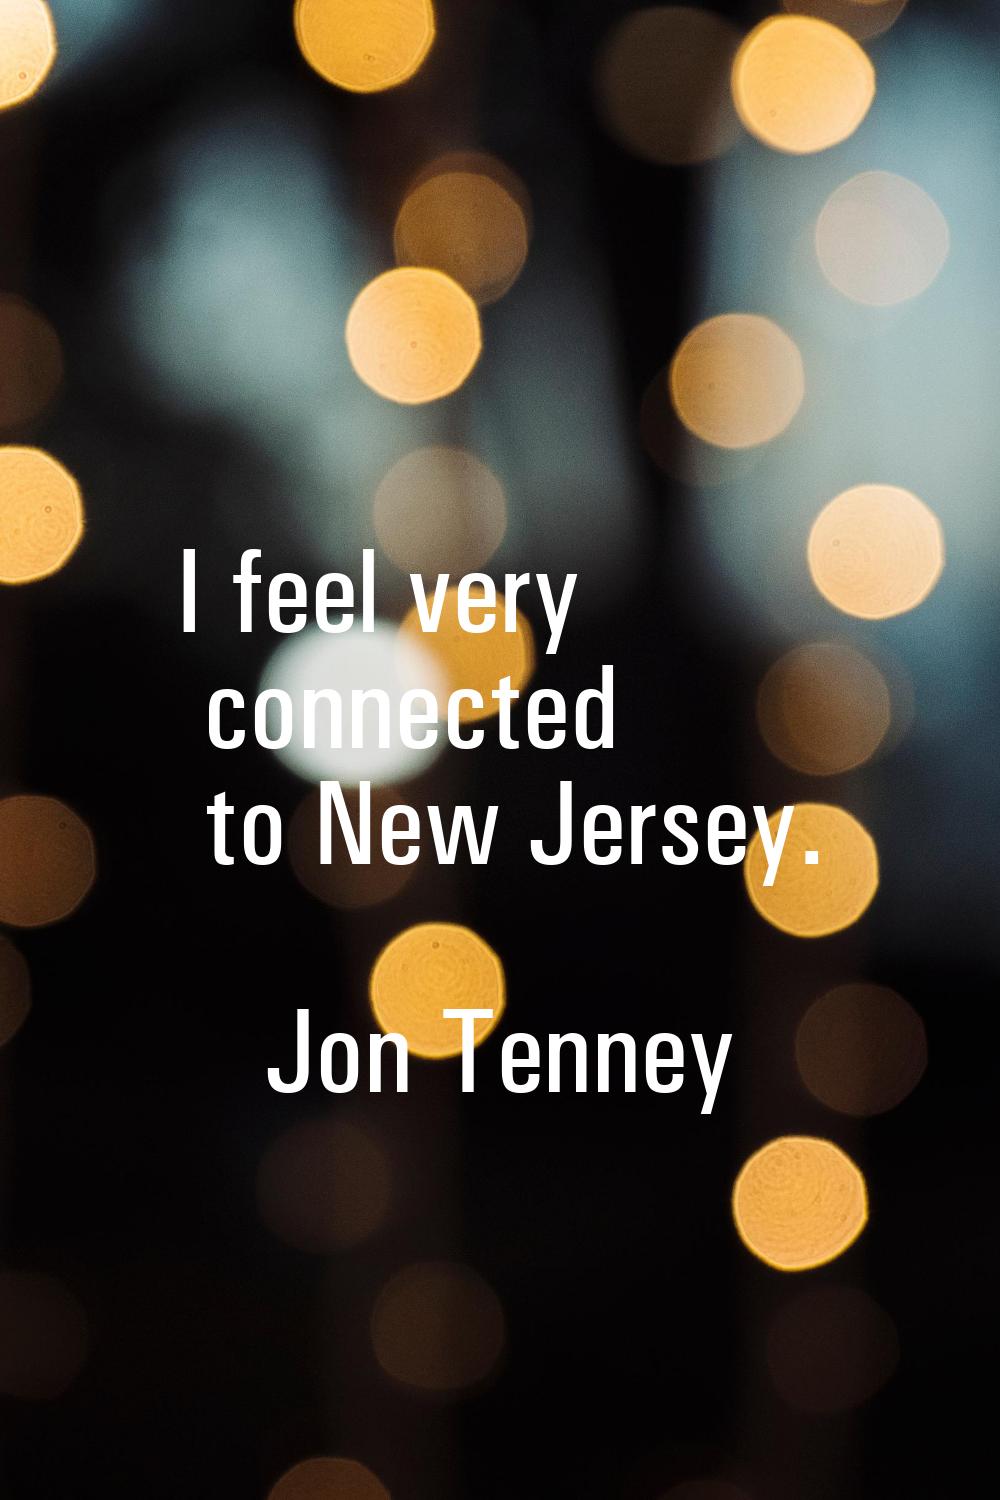 I feel very connected to New Jersey.